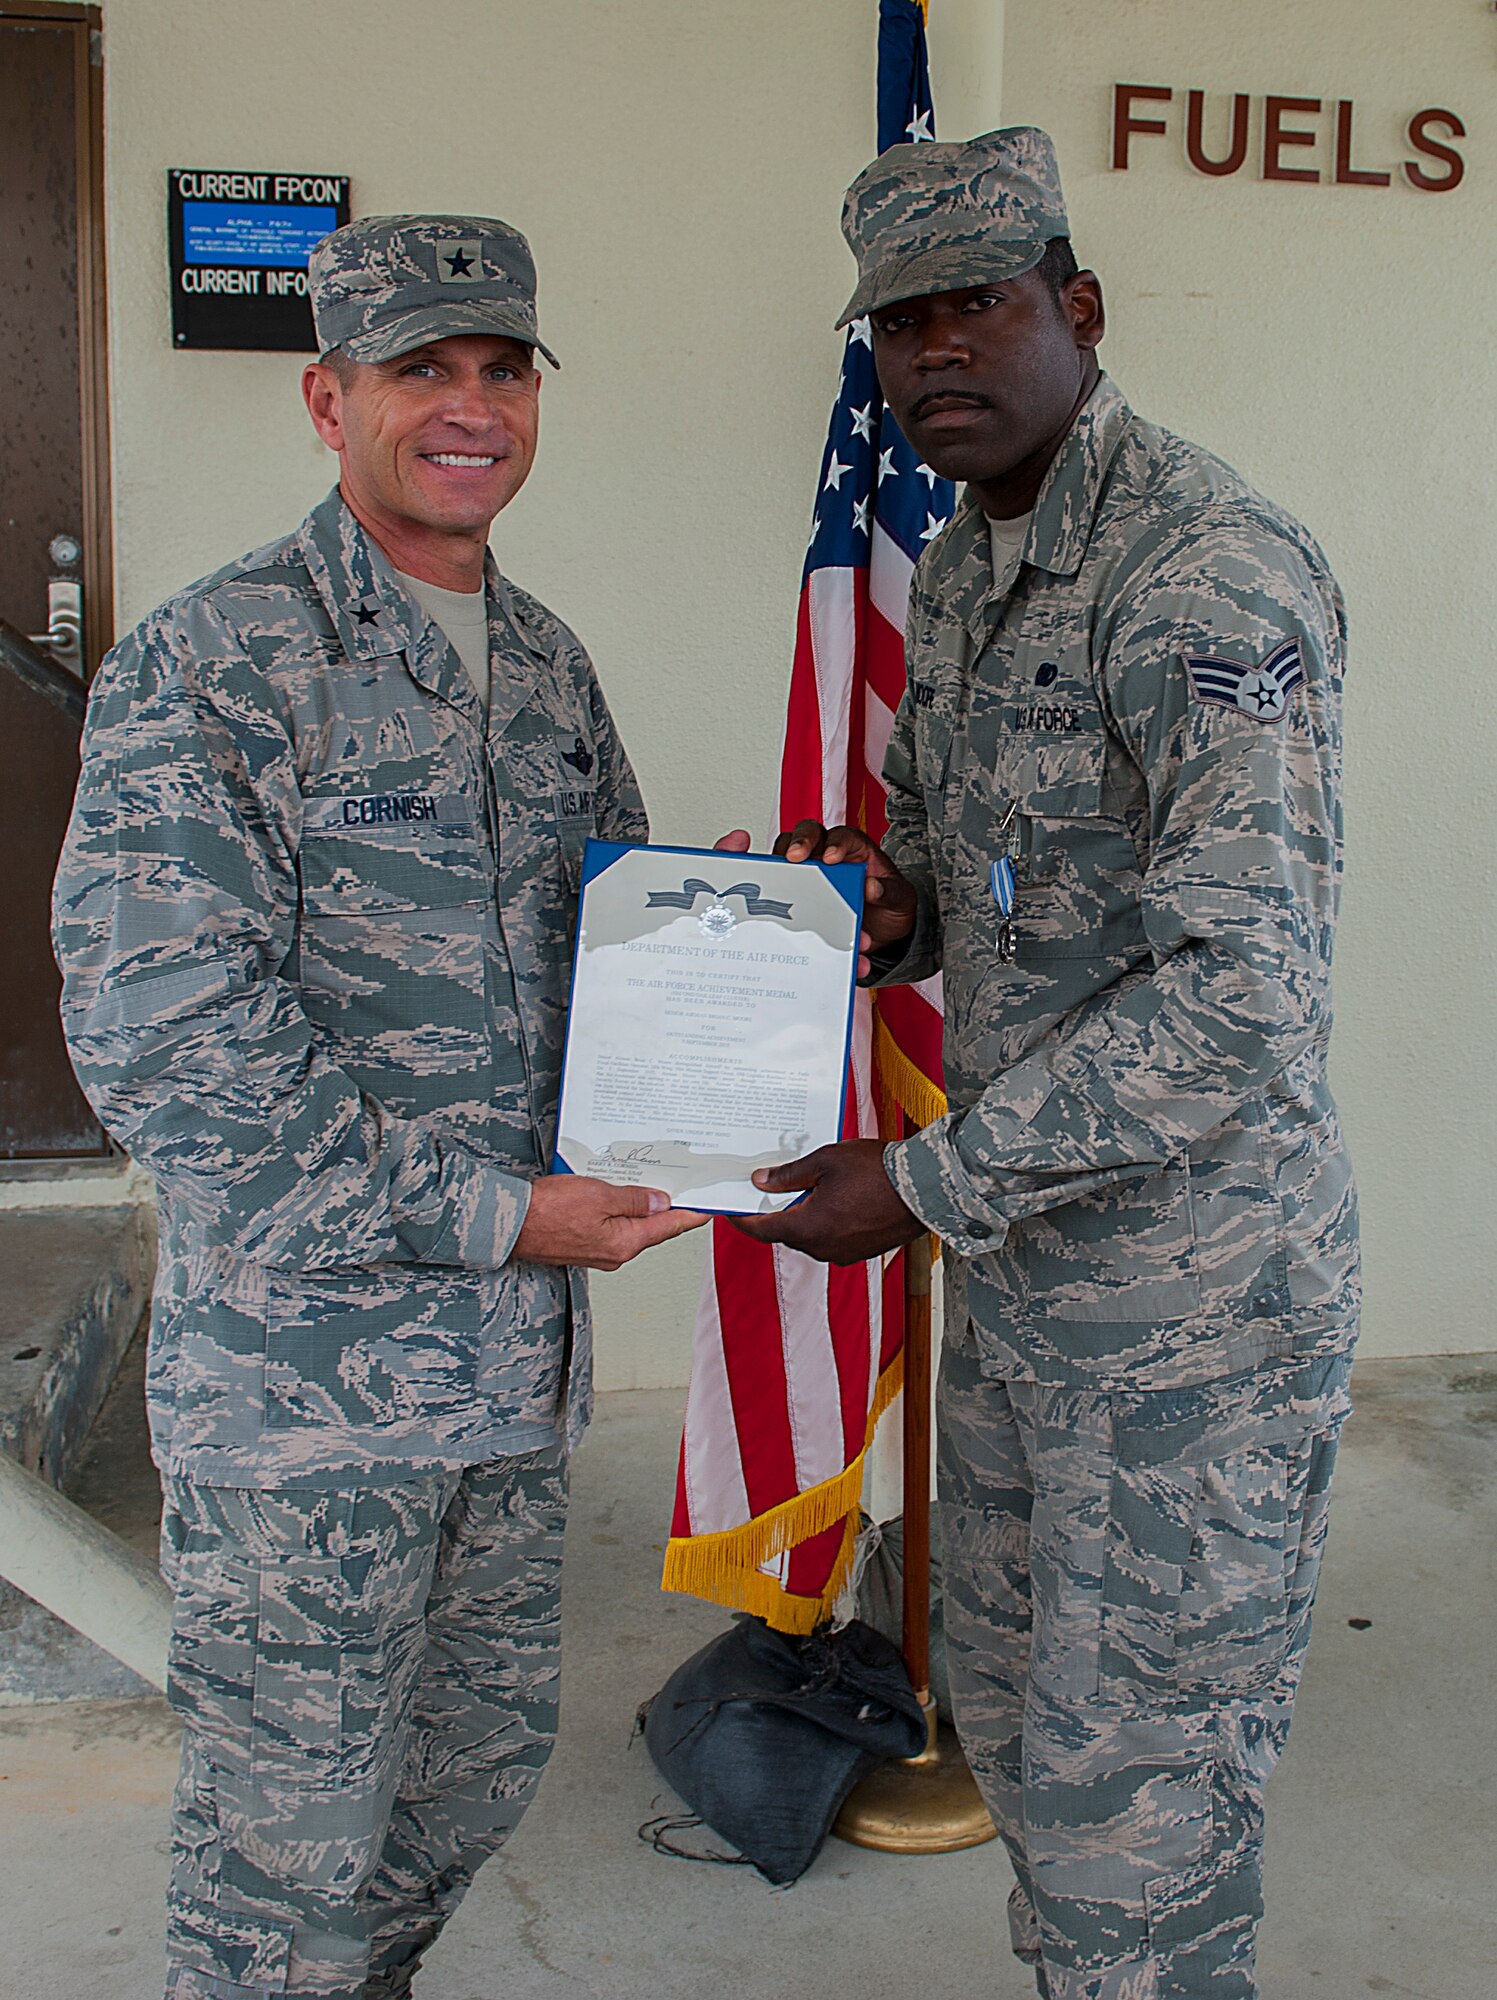 U.S. Air Force Brig. Gen. Barry Cornish, 18th Wing commander, hands Senior Airman Brian Moore, 18th Logistics Readiness Squadron fuels fixed facilities operator, an Air Force Achievement Medal citation Nov. 4, 2015, at Kadena Air Base, Japan. Moore and two other Airmen received the award for their role in saving the life of a fellow Airman. (U.S. Air Force photo by Airman 1st Class Corey M. Pettis)